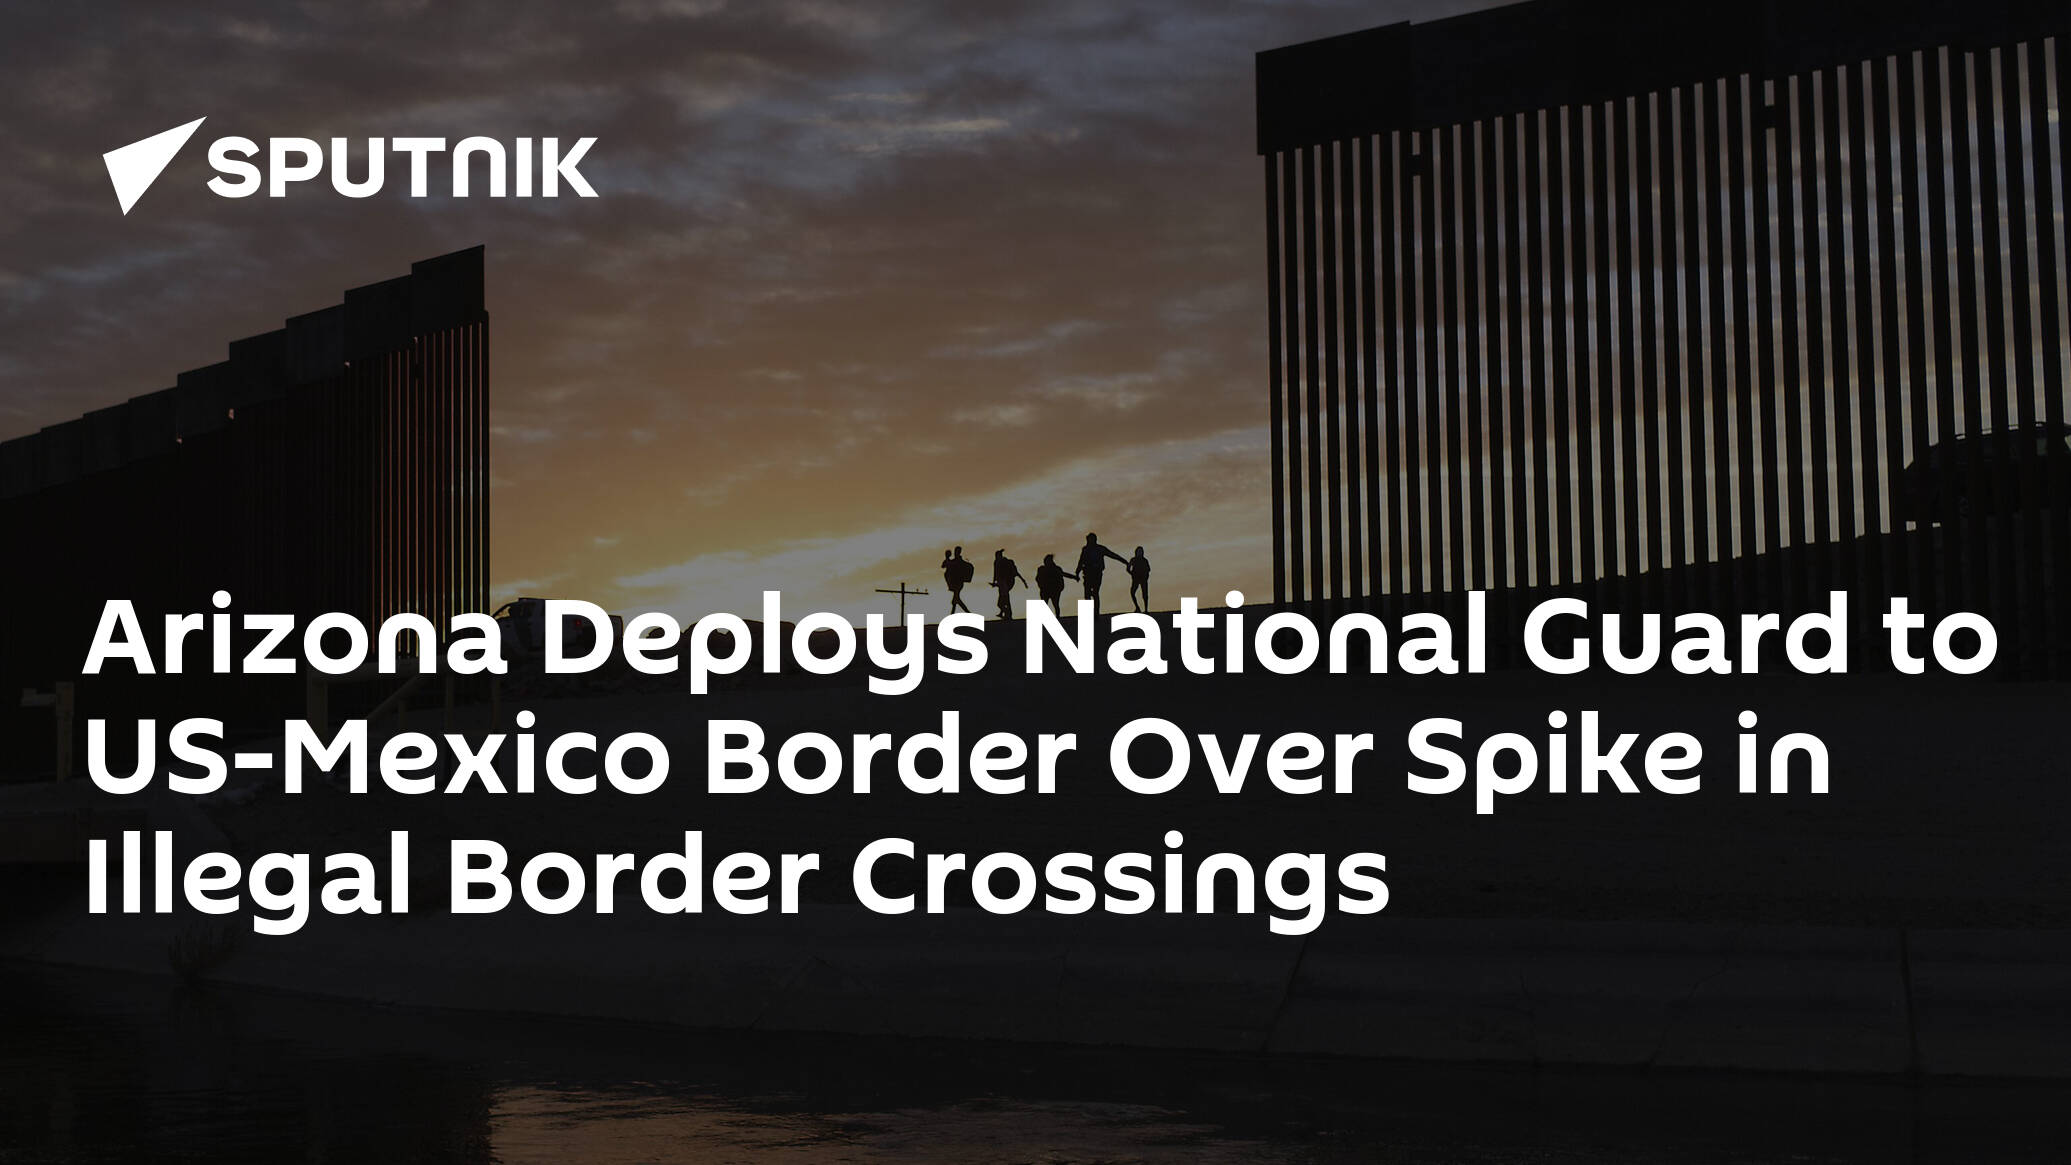 Arizona Deploys National Guard to US-Mexico Border Over Spike in Illegal Border Crossings